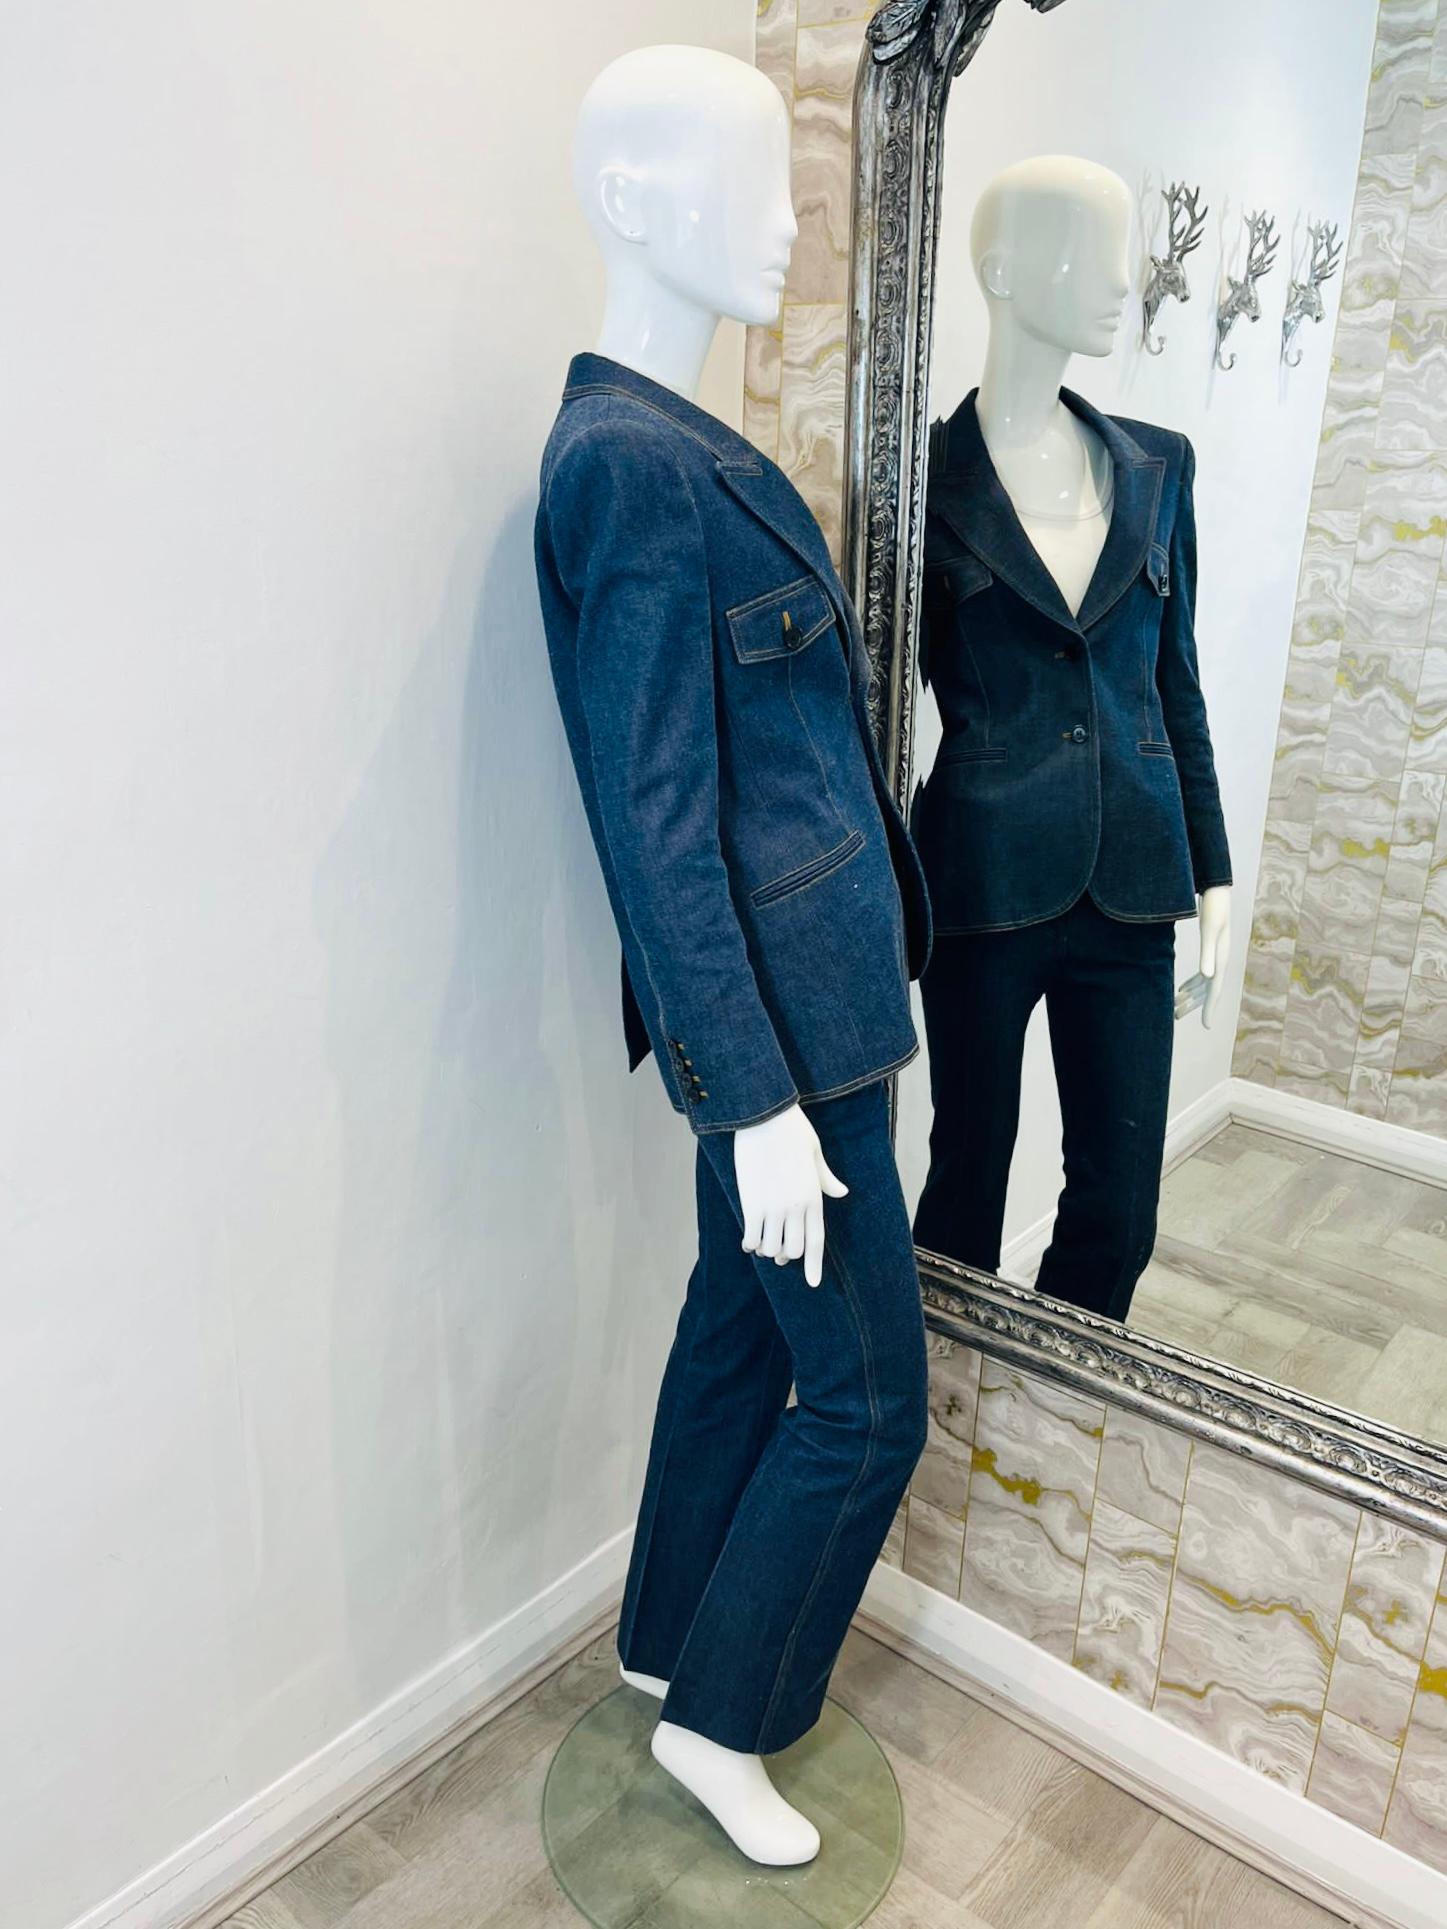 Saint Laurent Denim Jacket & Trousers In Excellent Condition For Sale In London, GB